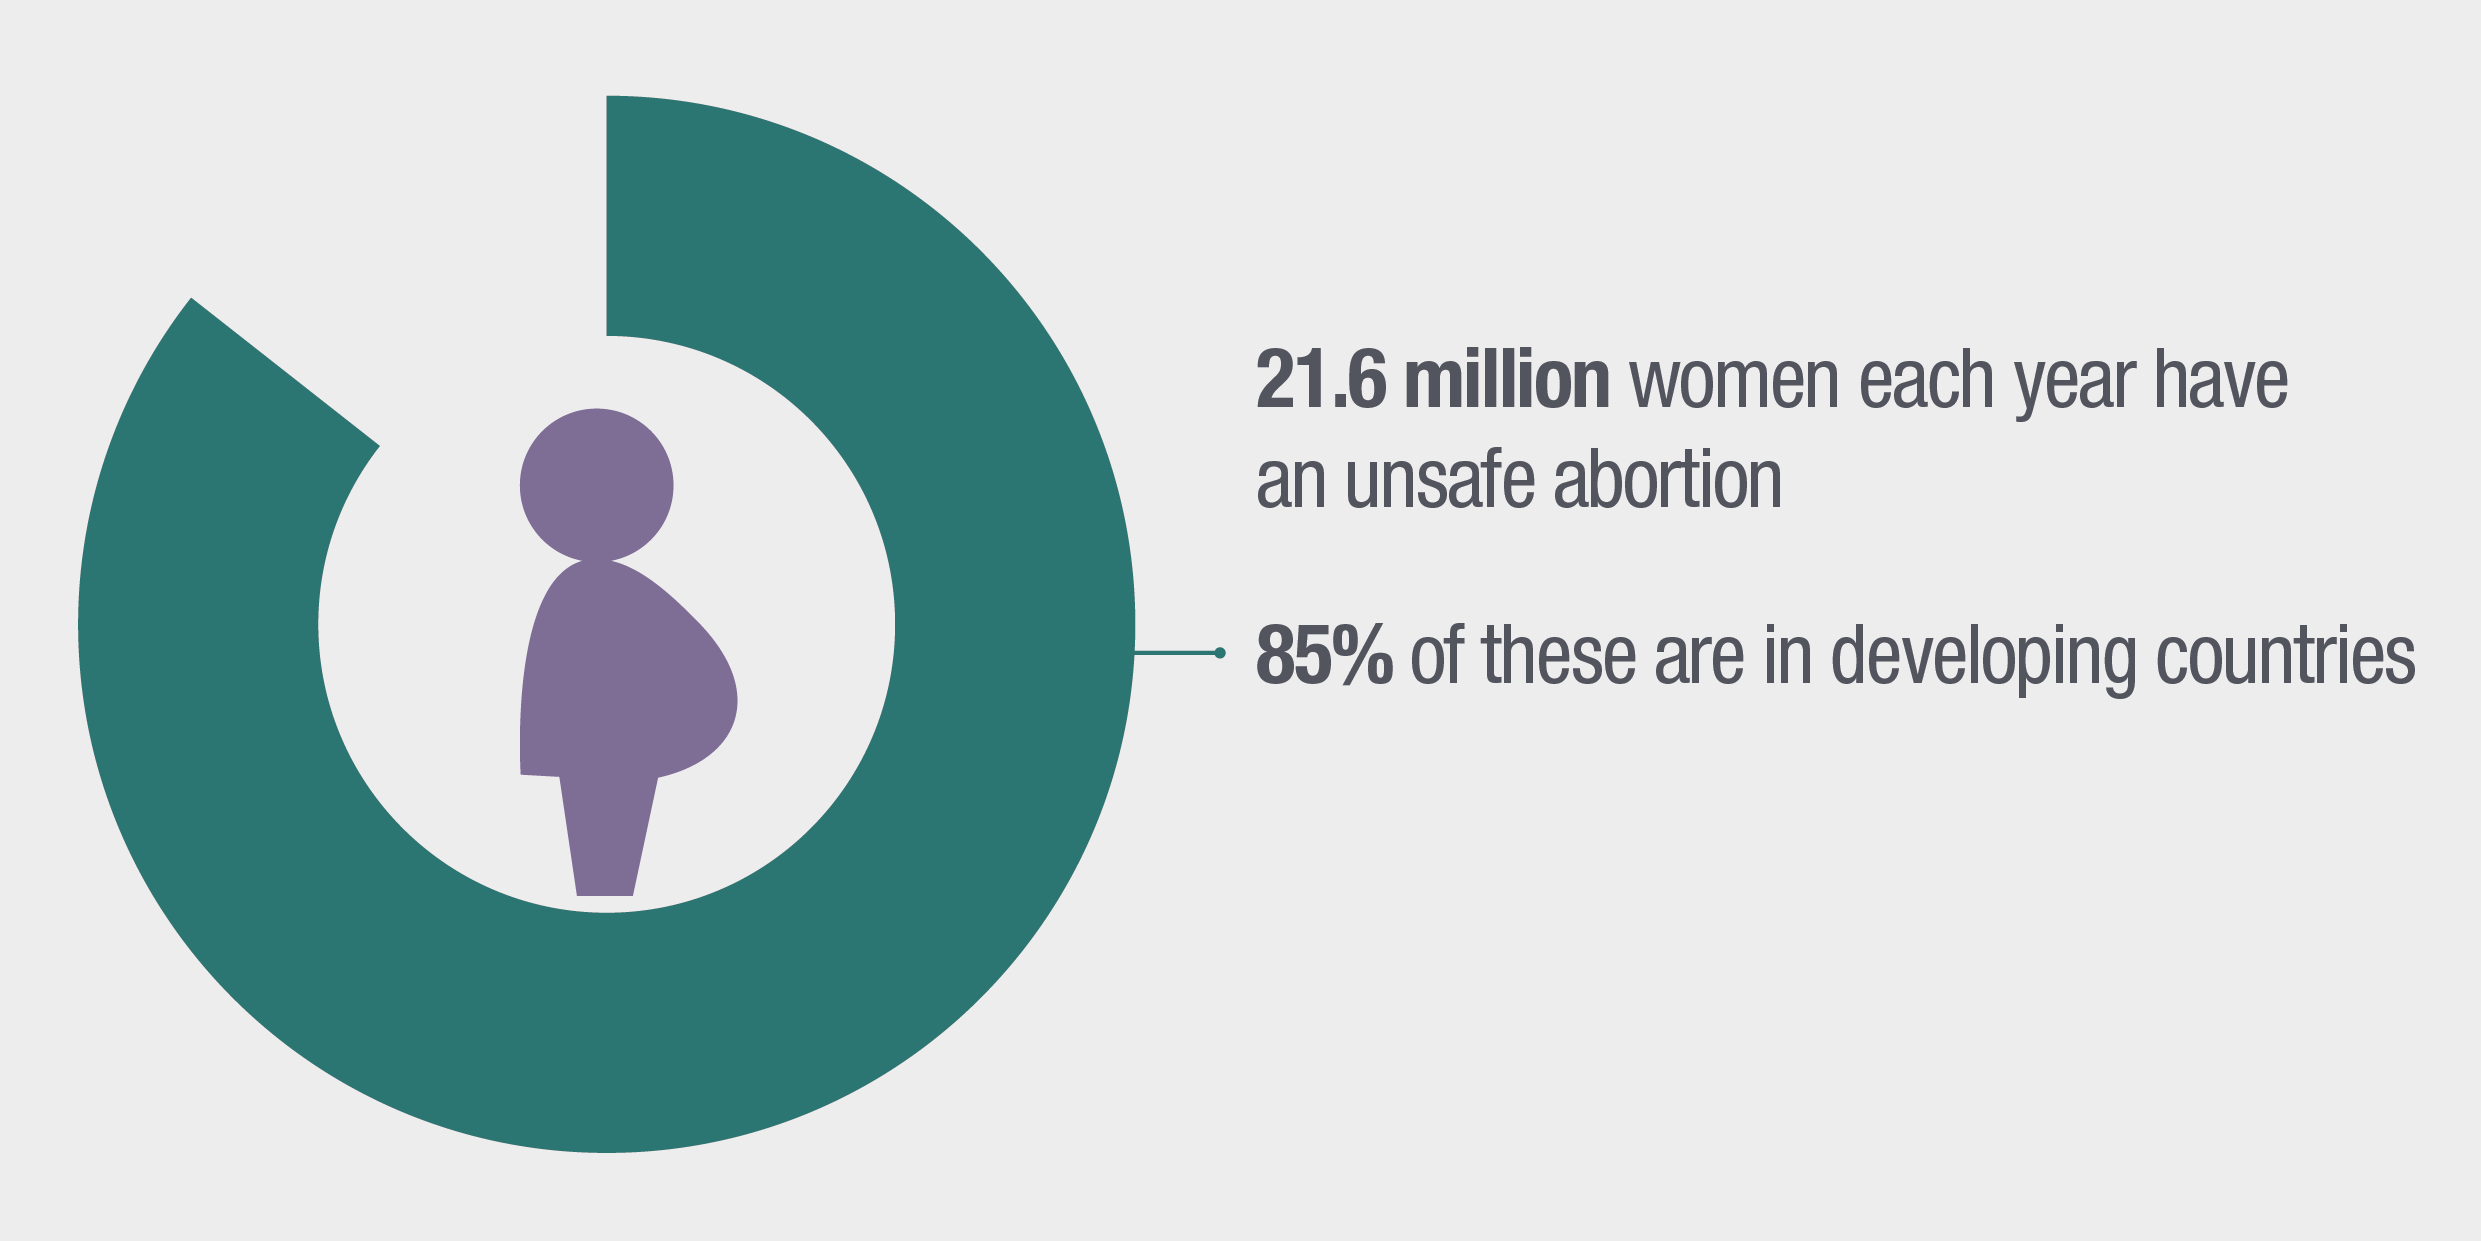 21.6 million women each year have an unsafe abortion. 85% of these are in developing countries